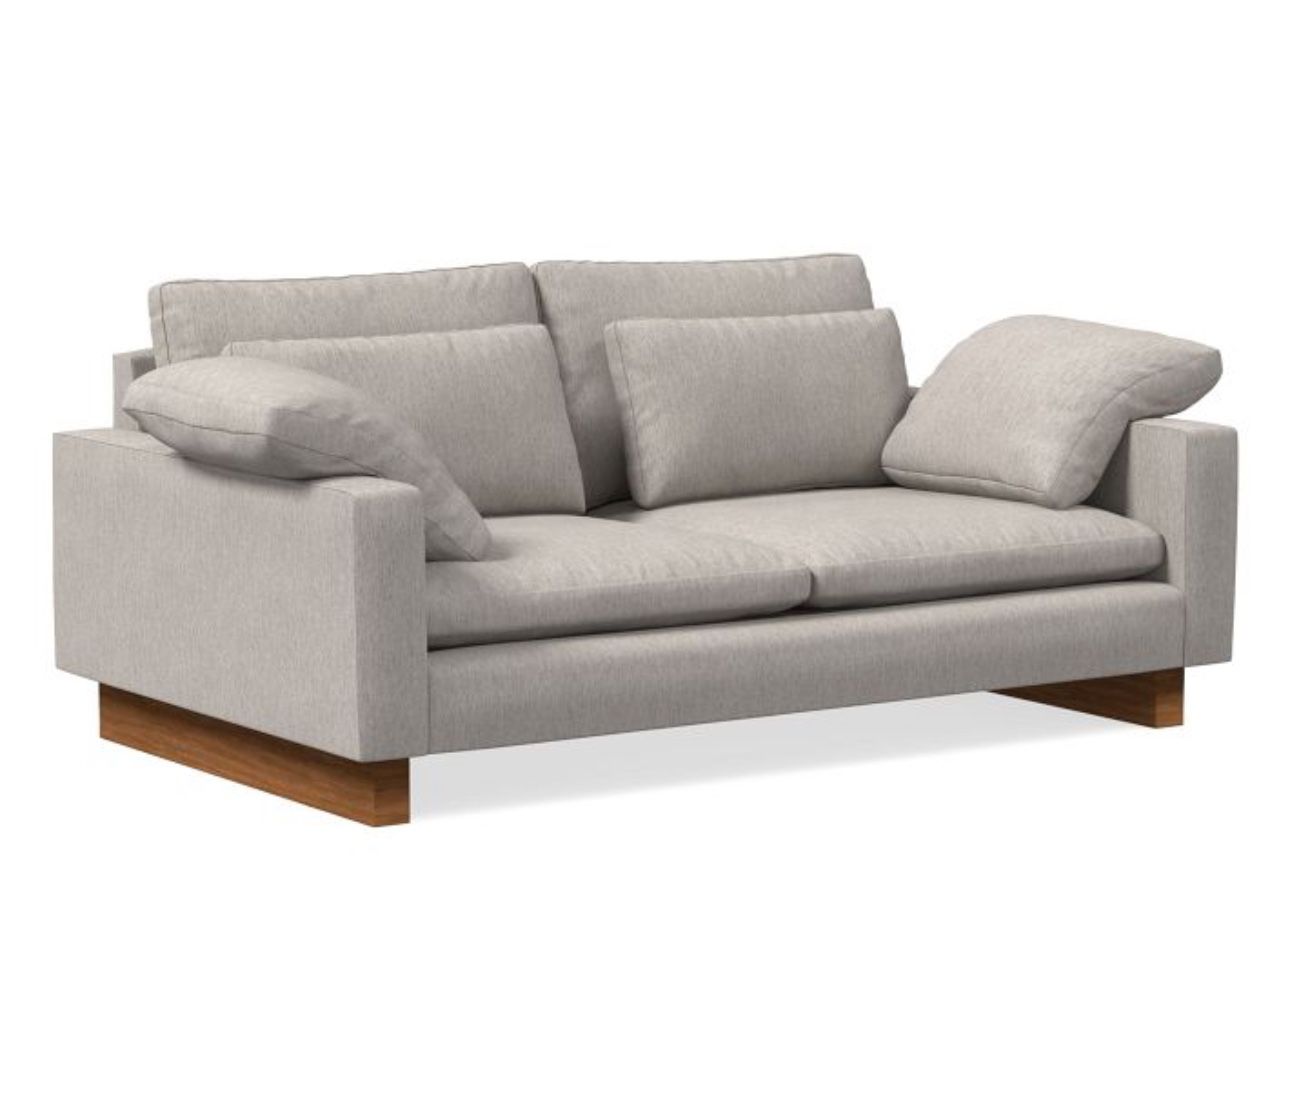 West elm Harmony Couch 